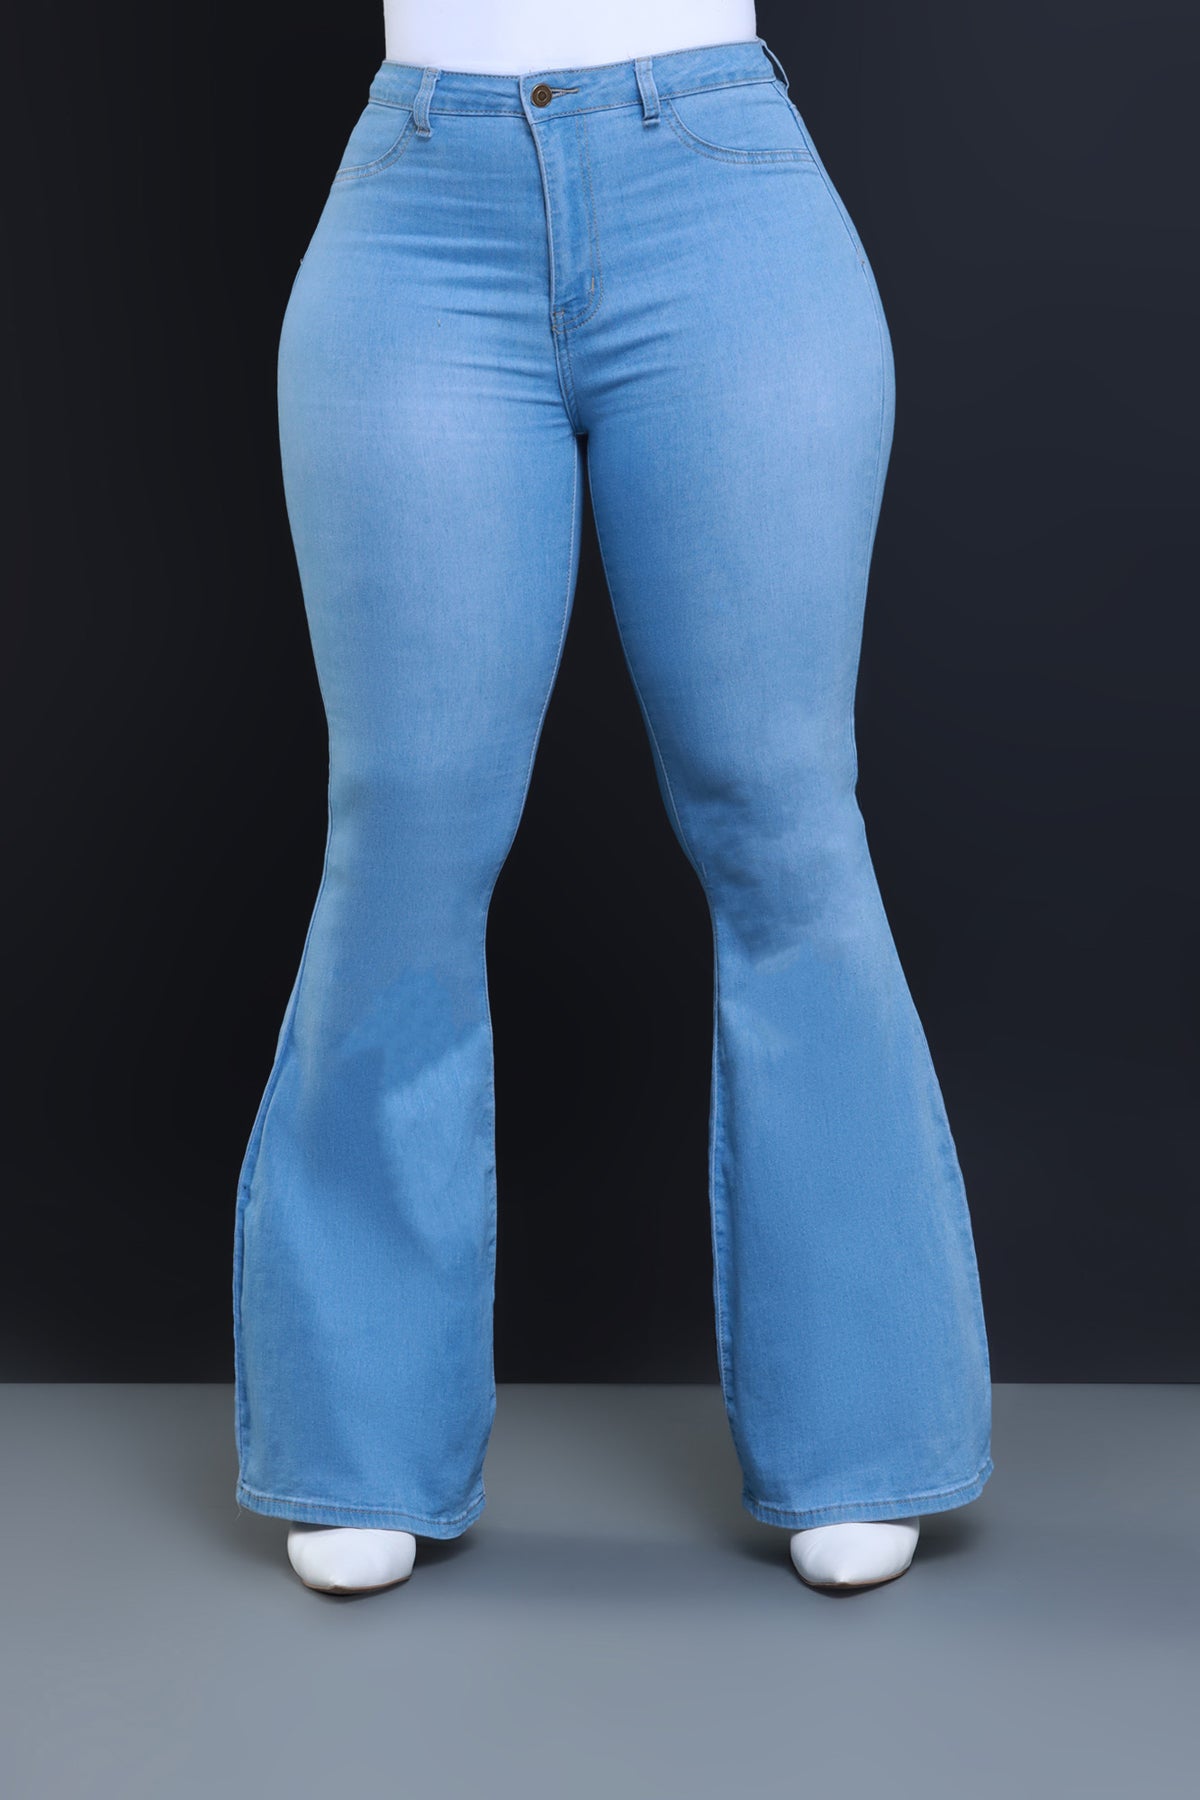 Deep In My Soul Flare Jeans - Medium Blue Wash  Flare jeans, New fashion  clothes, Tight jeans girls